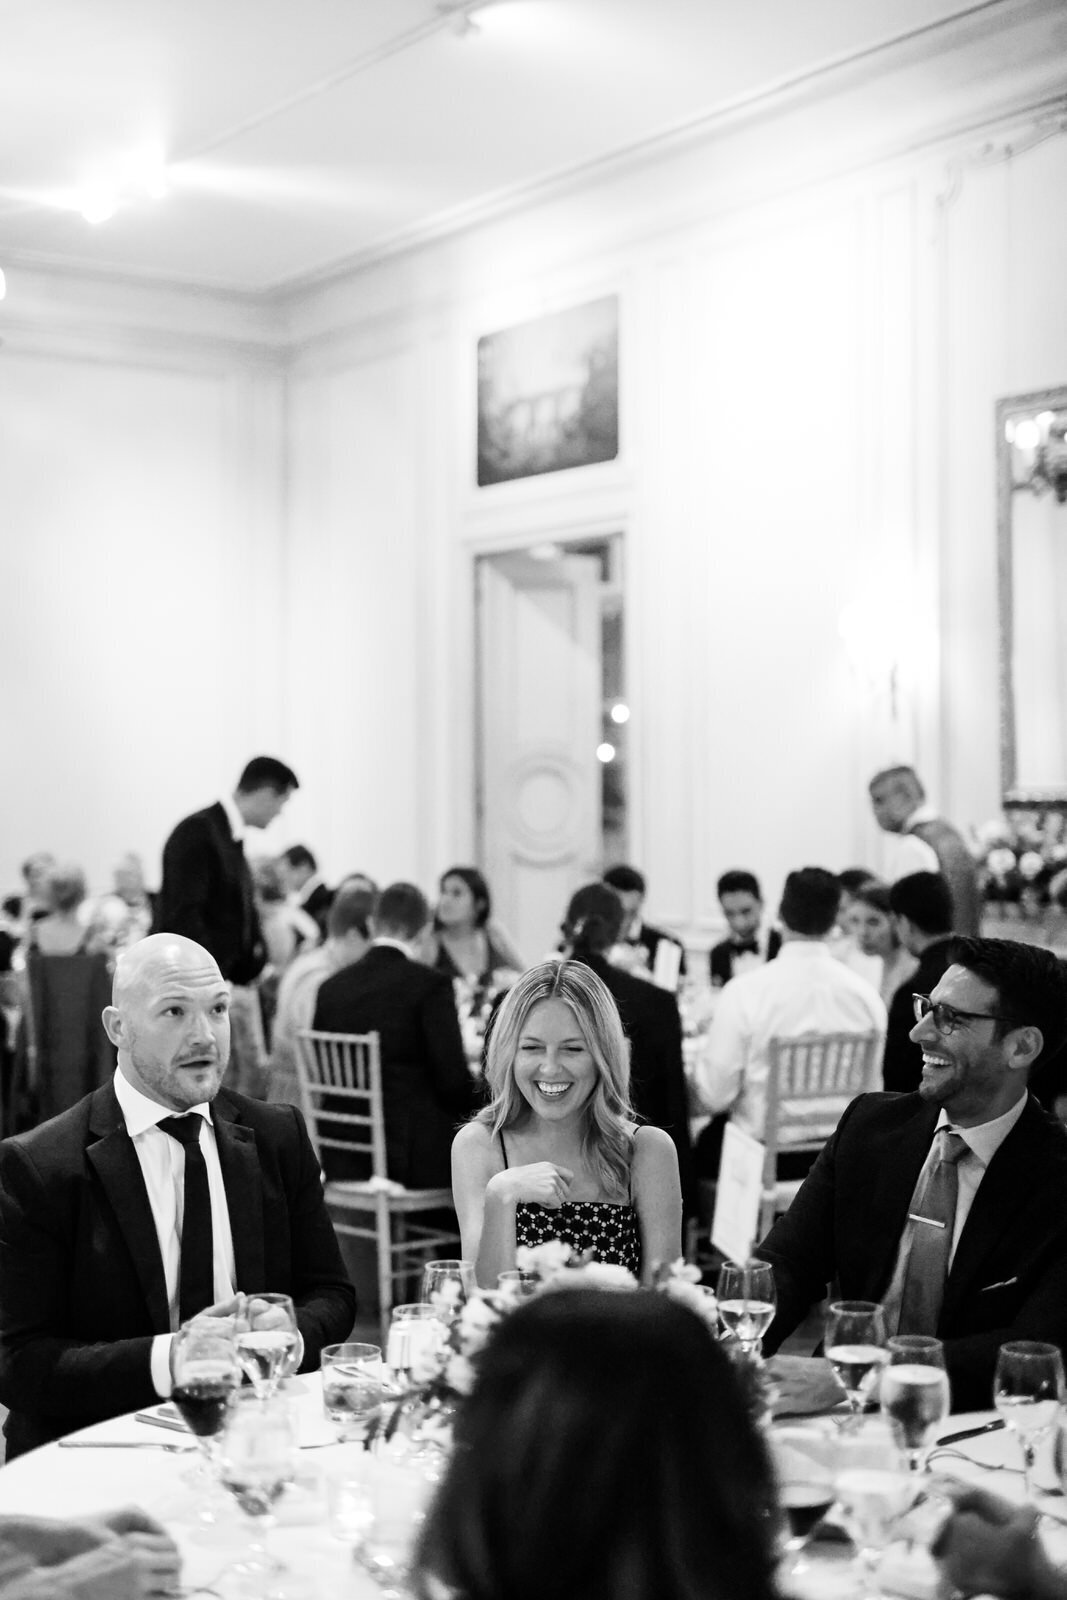 Candid wedding reception photography at the European DC Wedding Venue, the Meridian House.